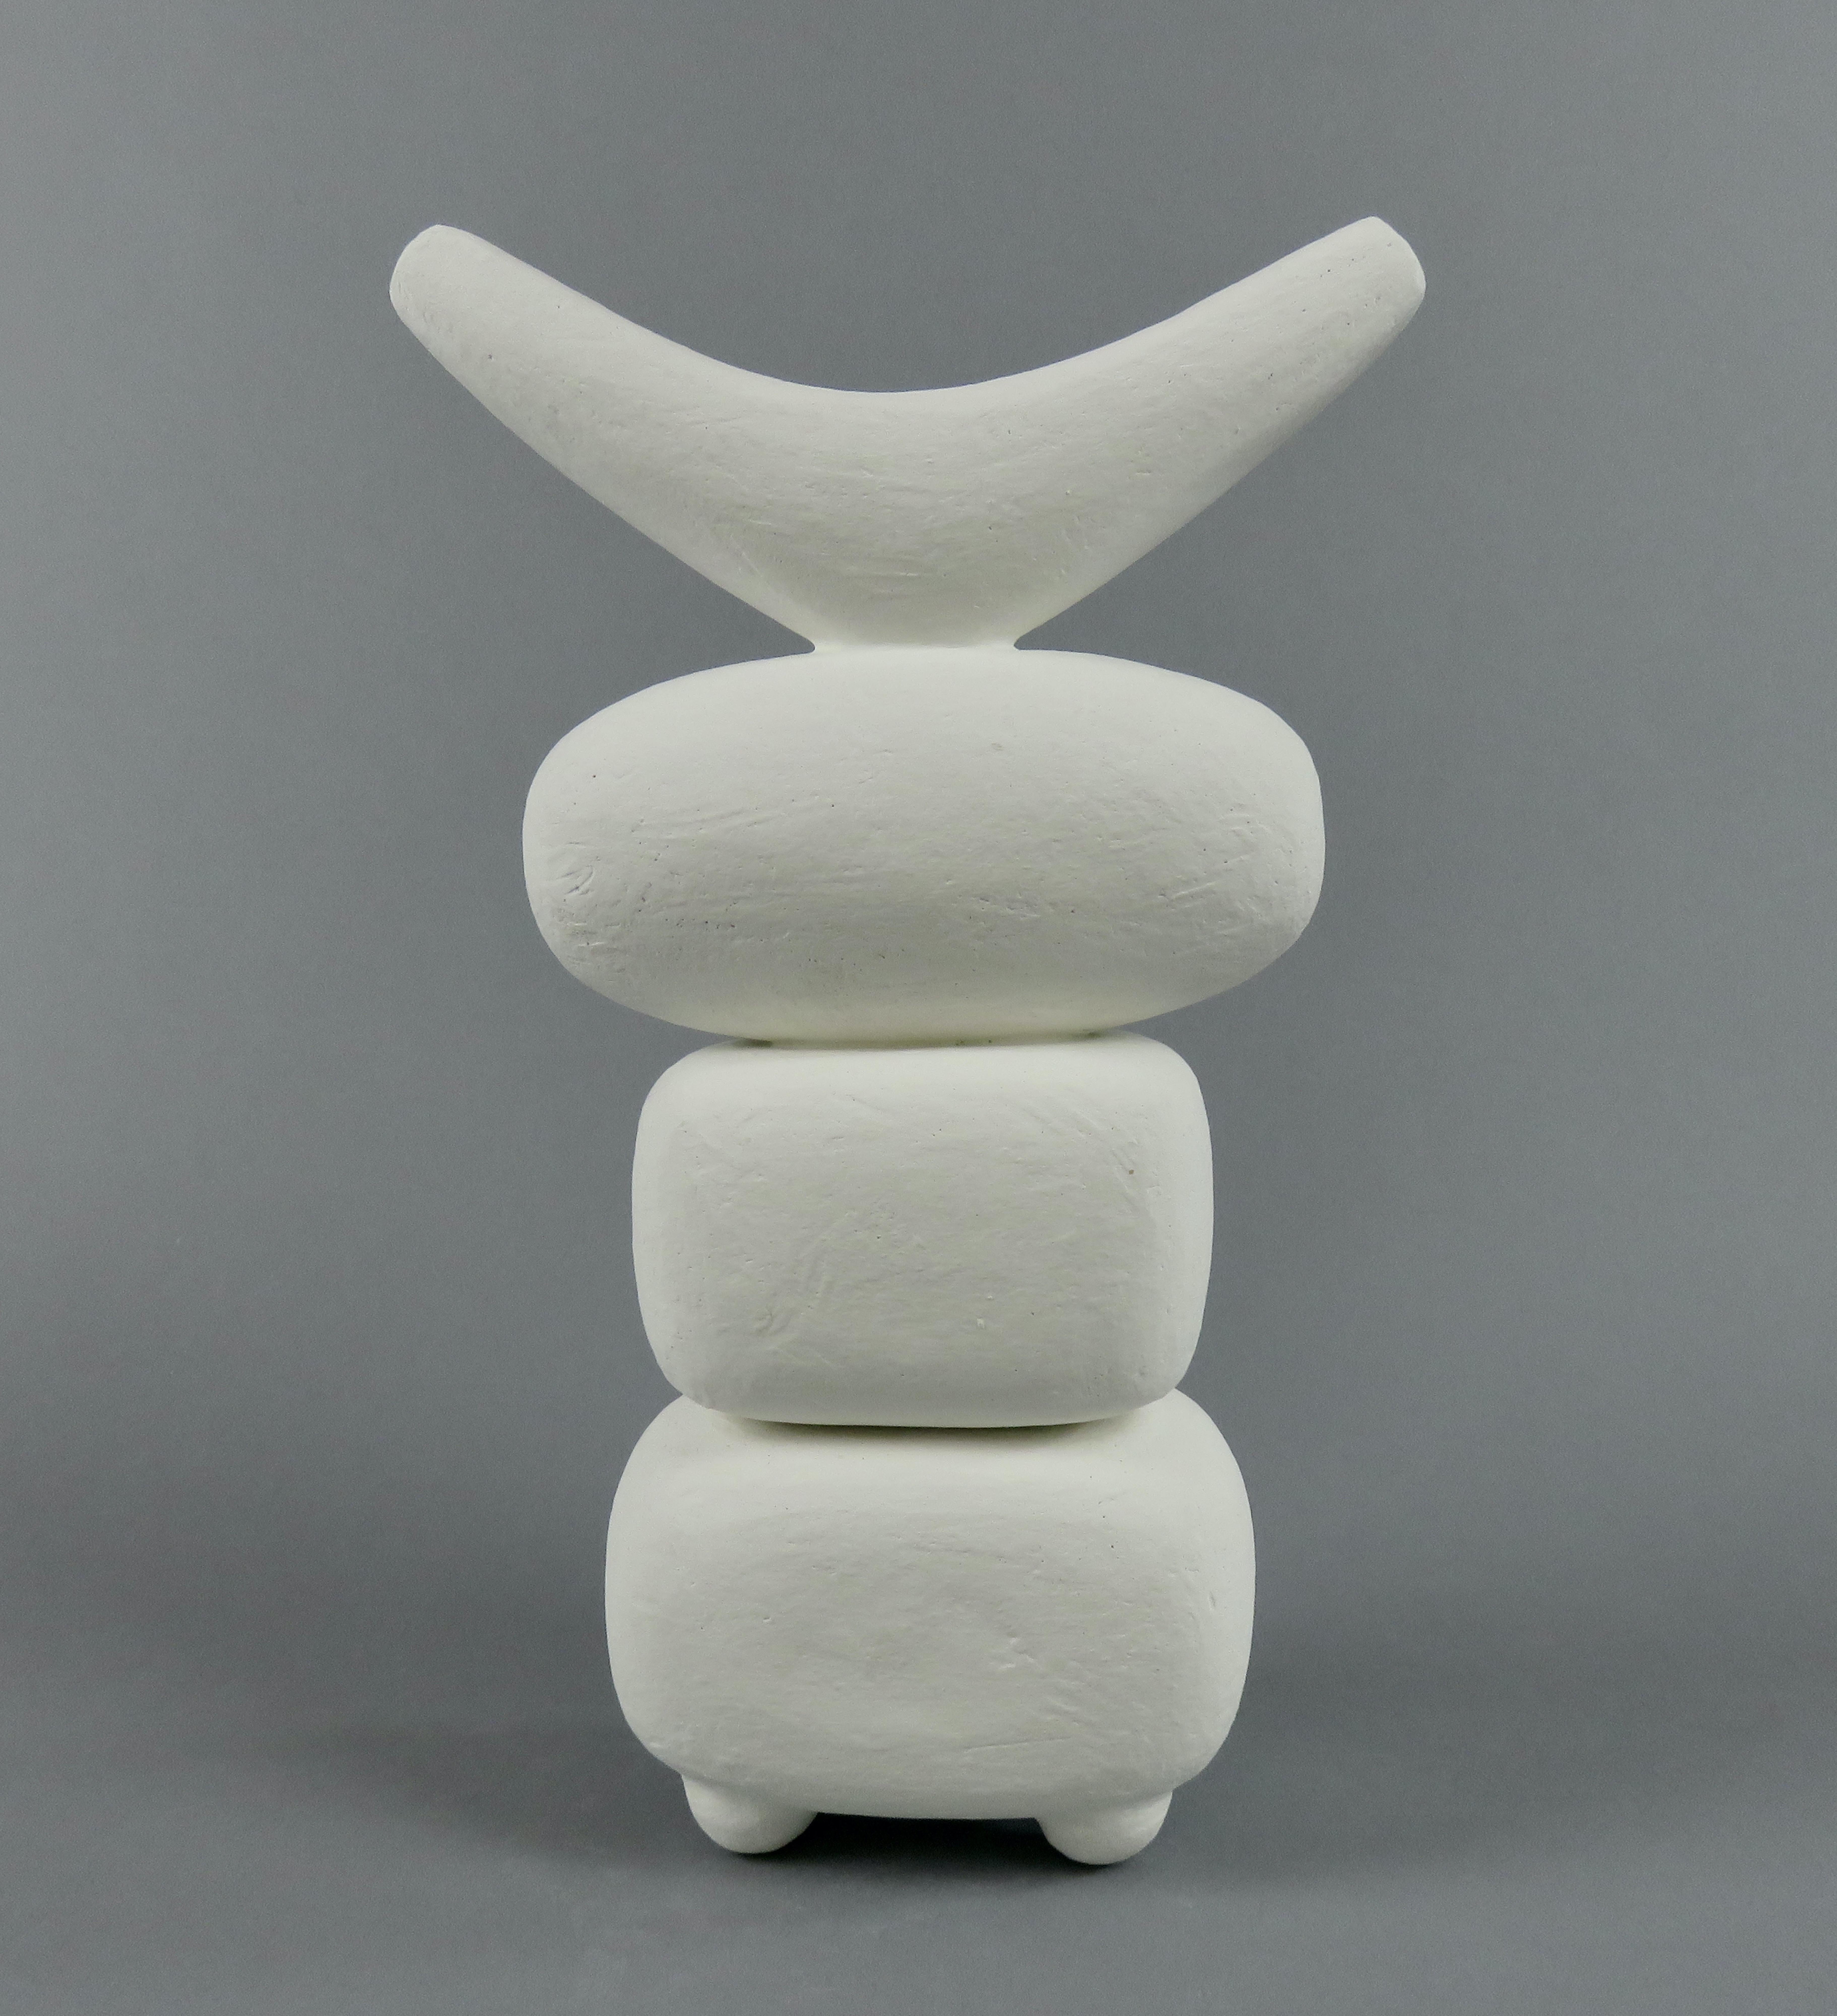 Hand-Crafted White Winged Crown, 4 Part Ceramic TOTEM, Hand Built Sculpture by H. Starcevic For Sale